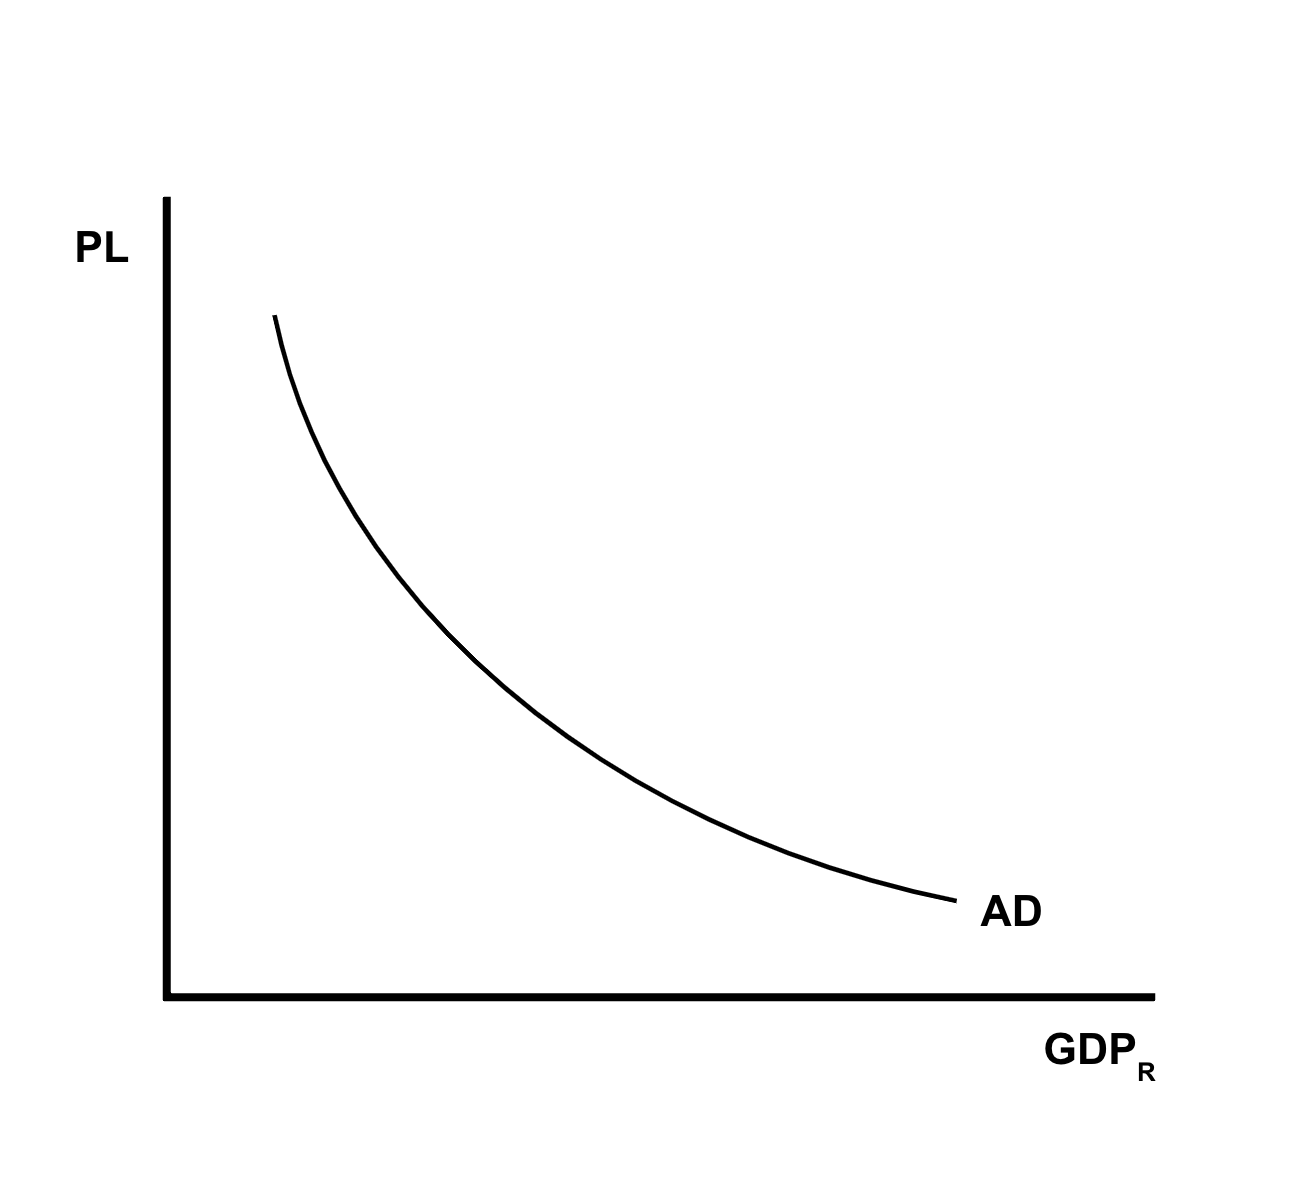 <p>→ the demand by consumers, businesses, government, and foreign countries → downward slope → x-axis: real domestic output, y-axis: price level</p>